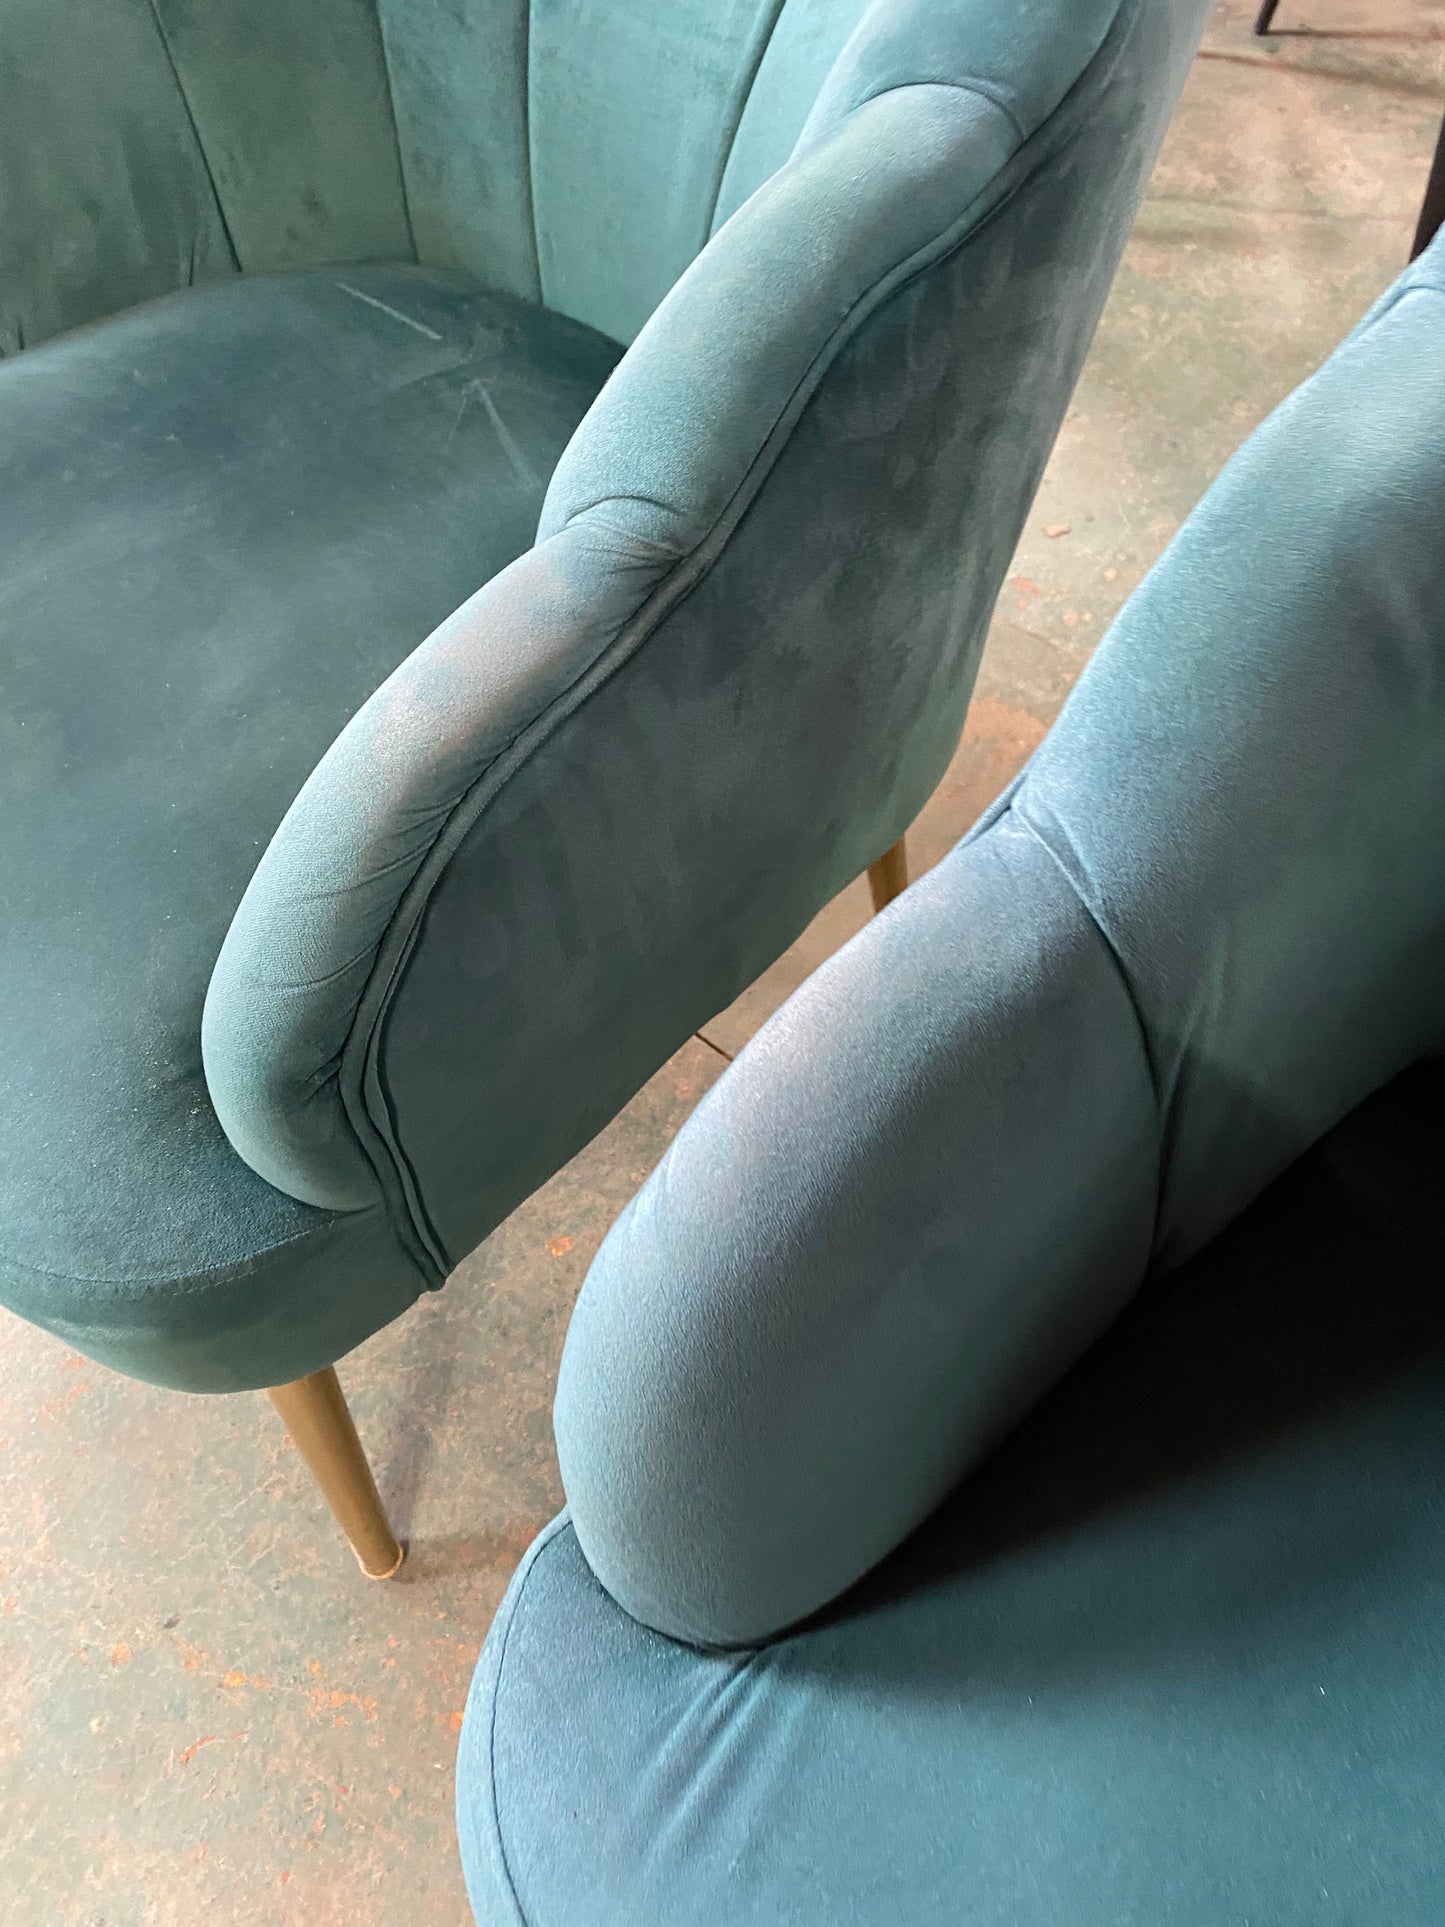 Pair of Green Shellback Chairs